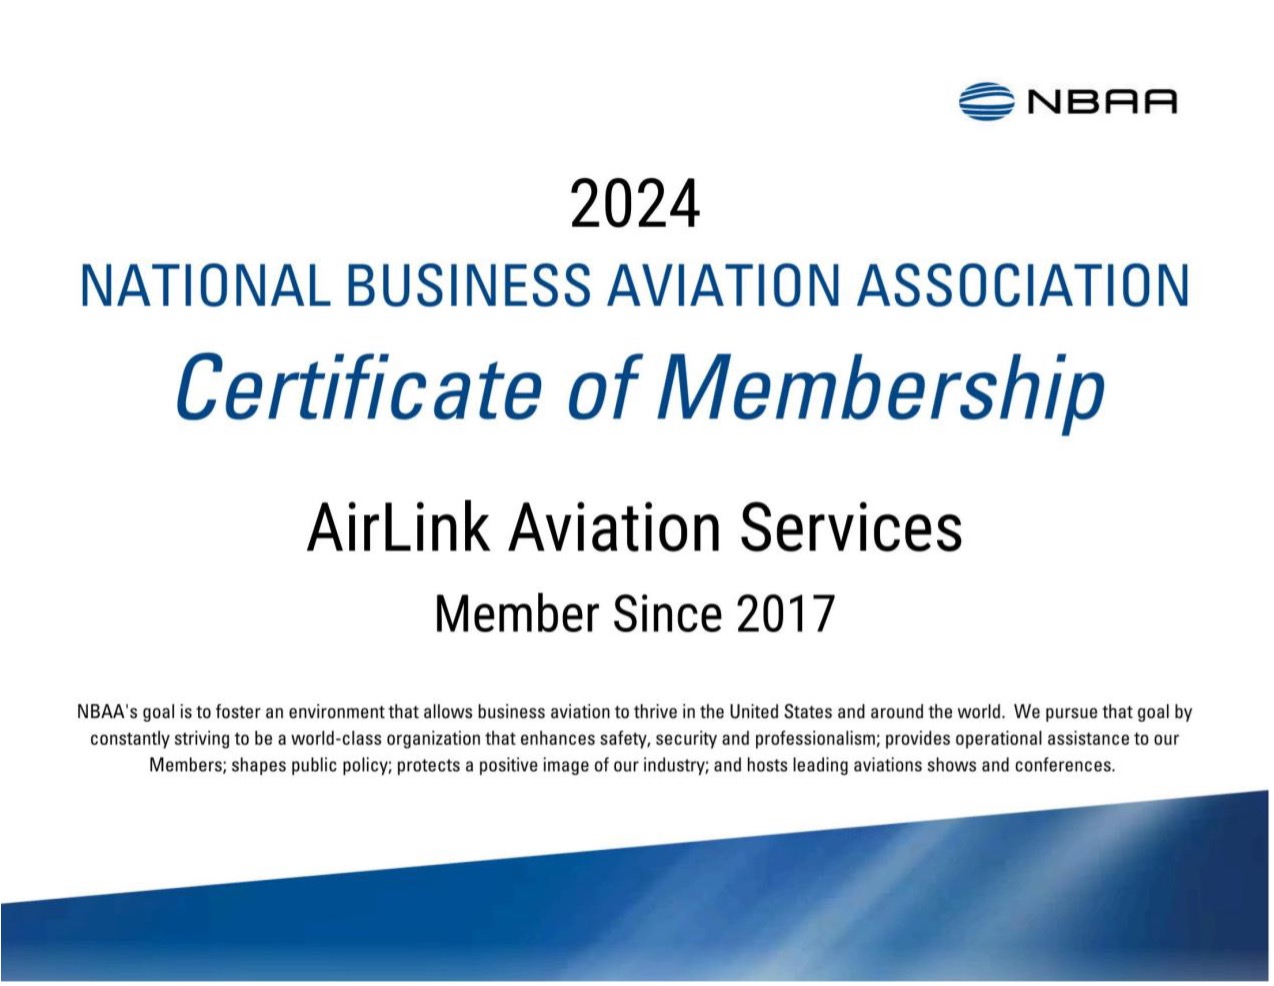 Congratulations to AirLink Aviation Services on becoming the member of the NBAA